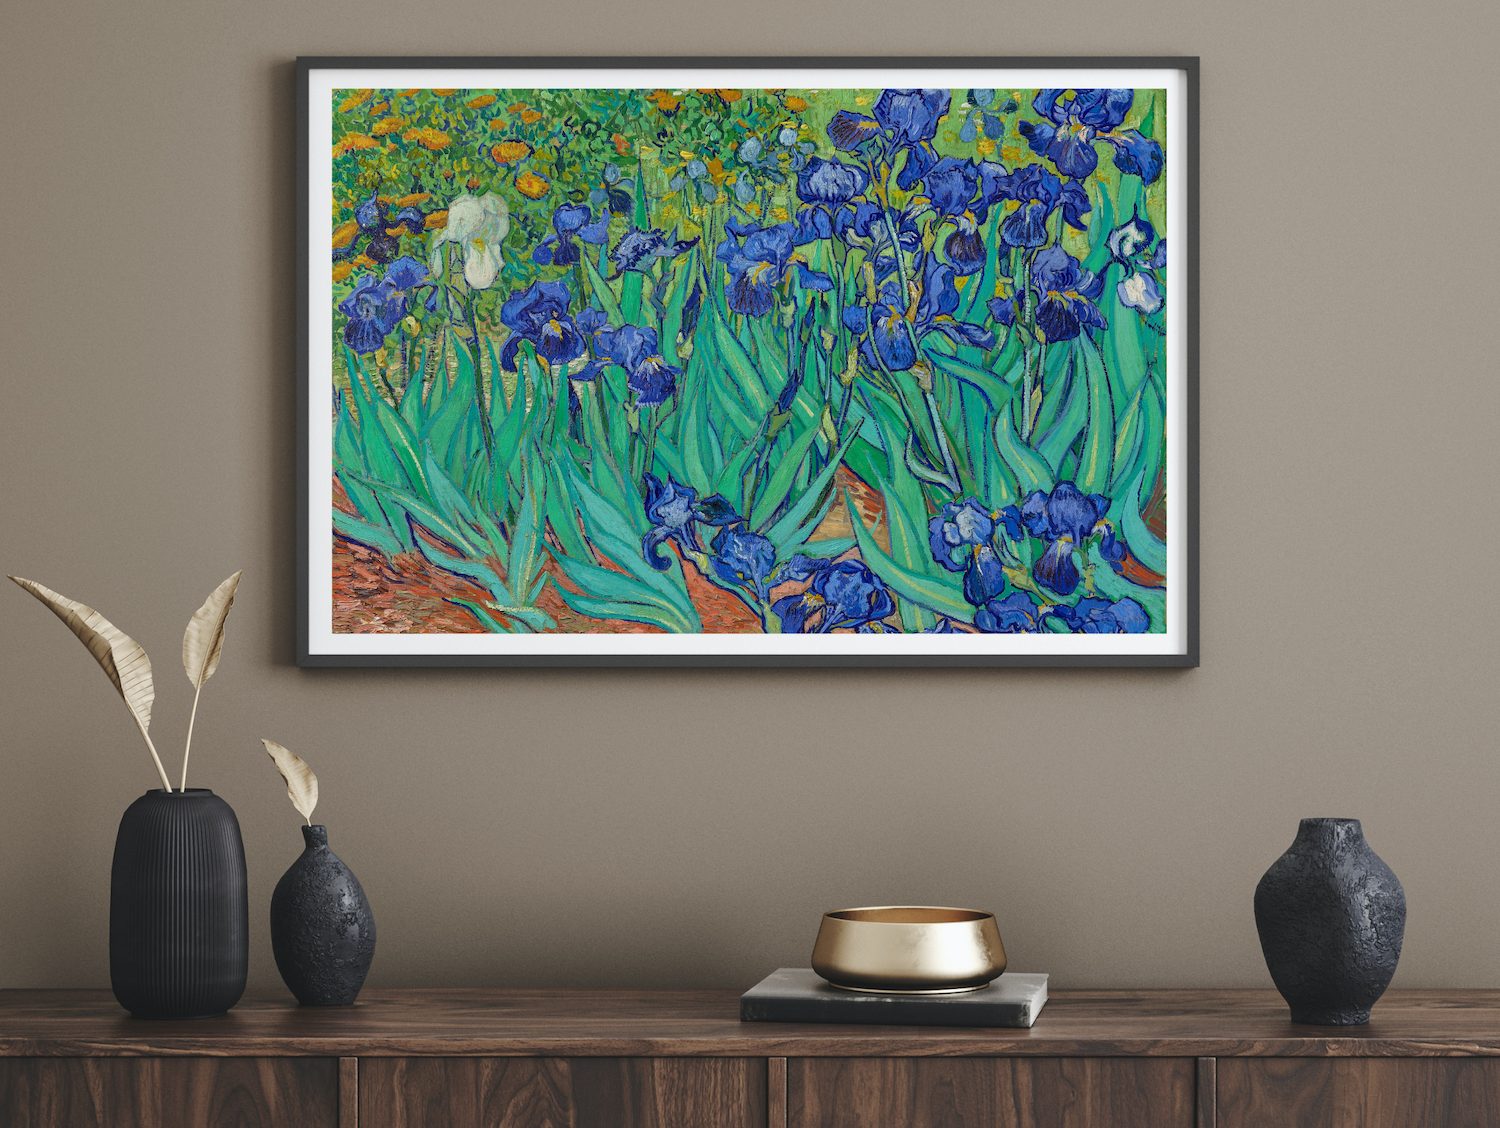 DailyArt's Favorite Paintings Available as Prints | DailyArt Magazine